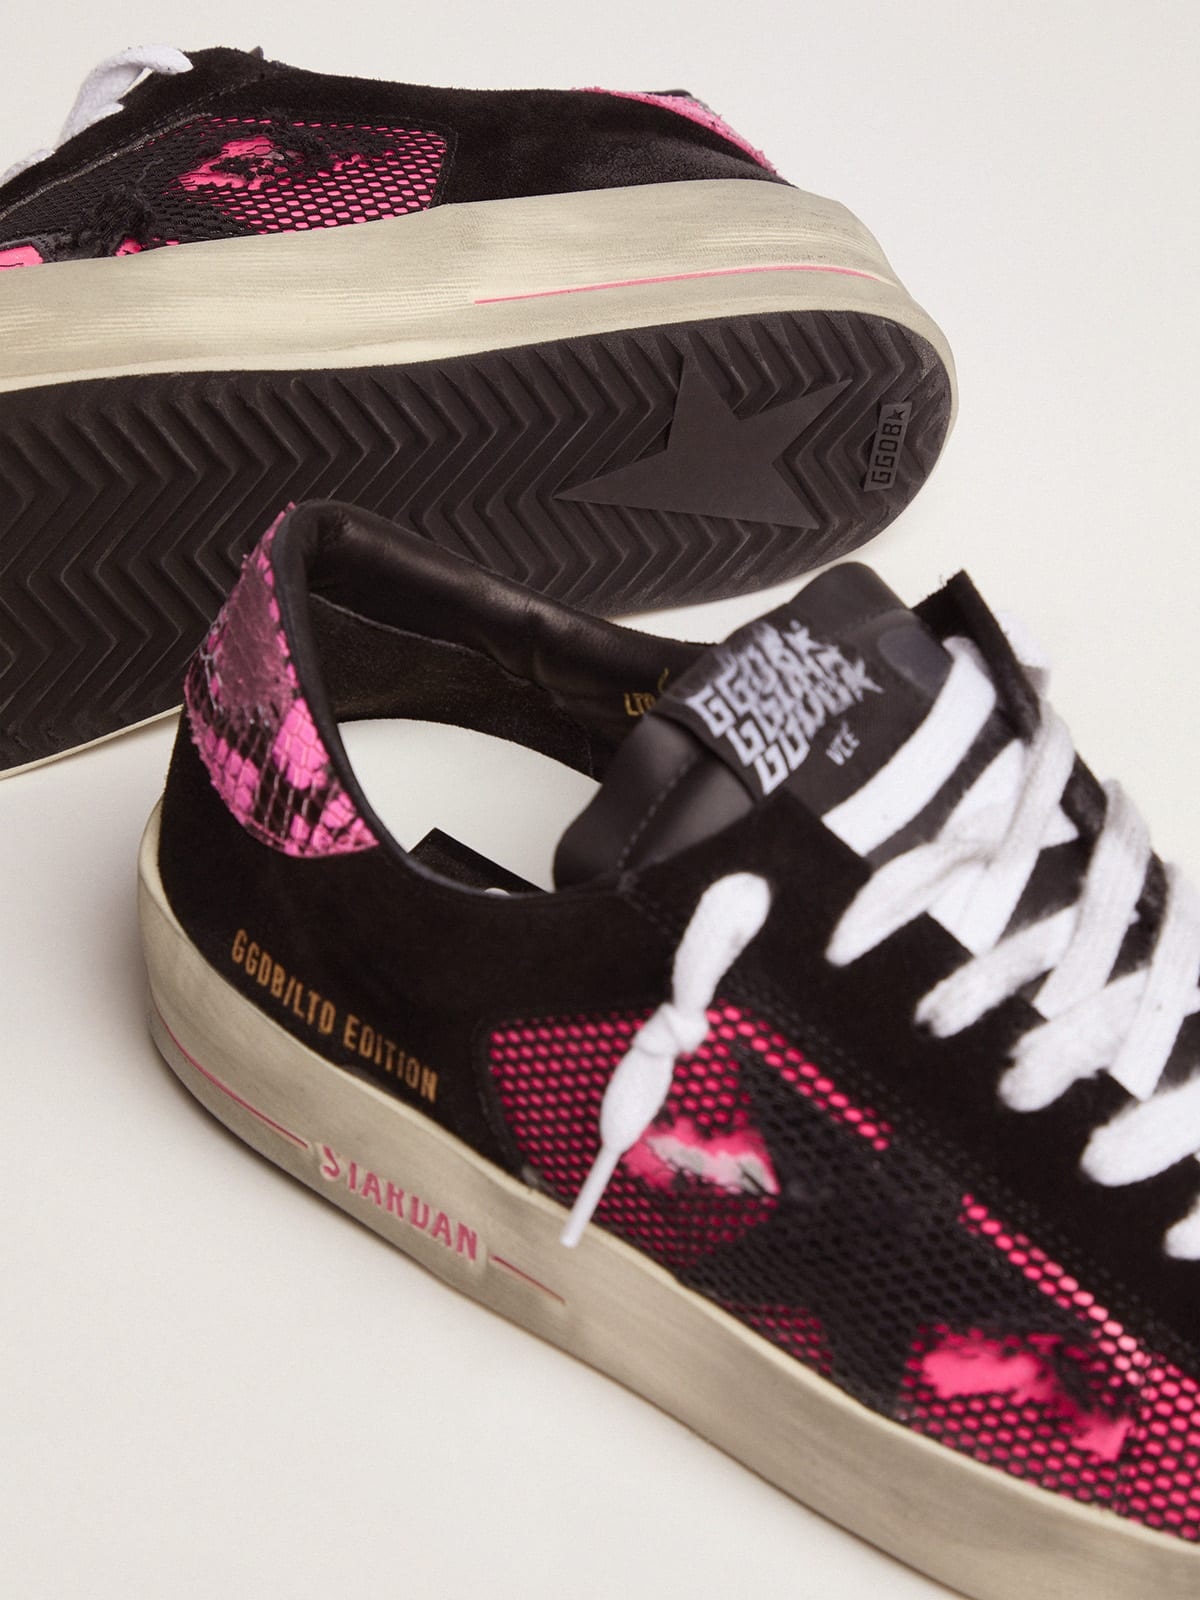 Women’s fuchsia and black Limited Edition LAB Stardan sneakers - 3